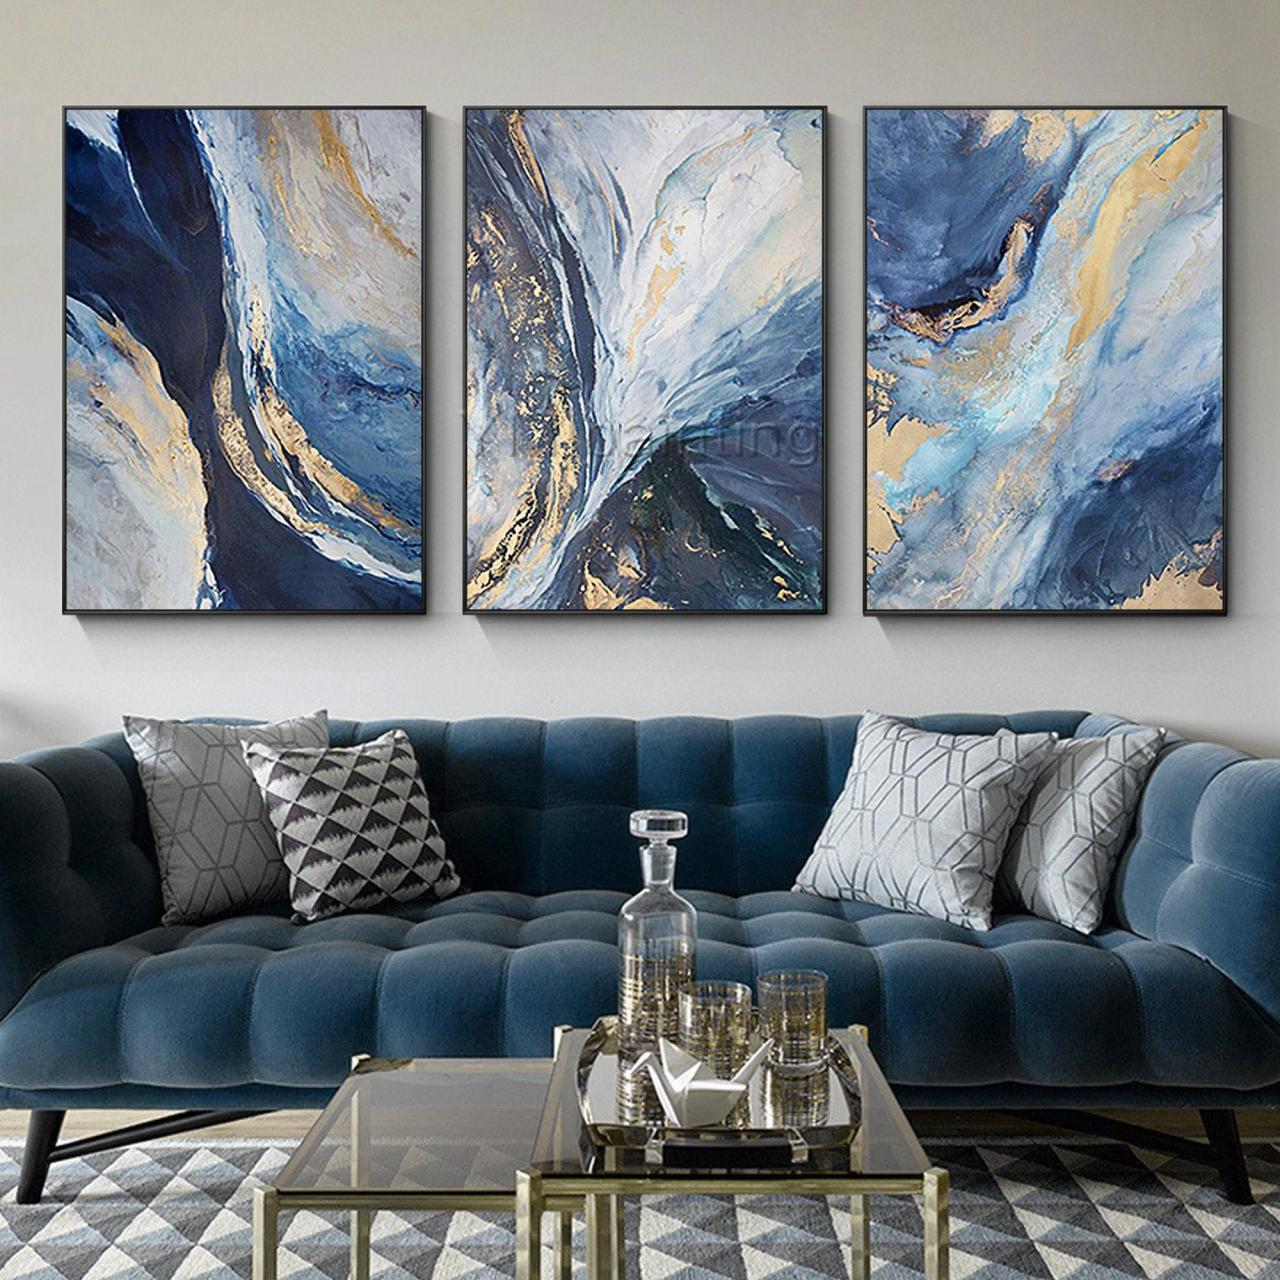 Art Pieces For Living Room